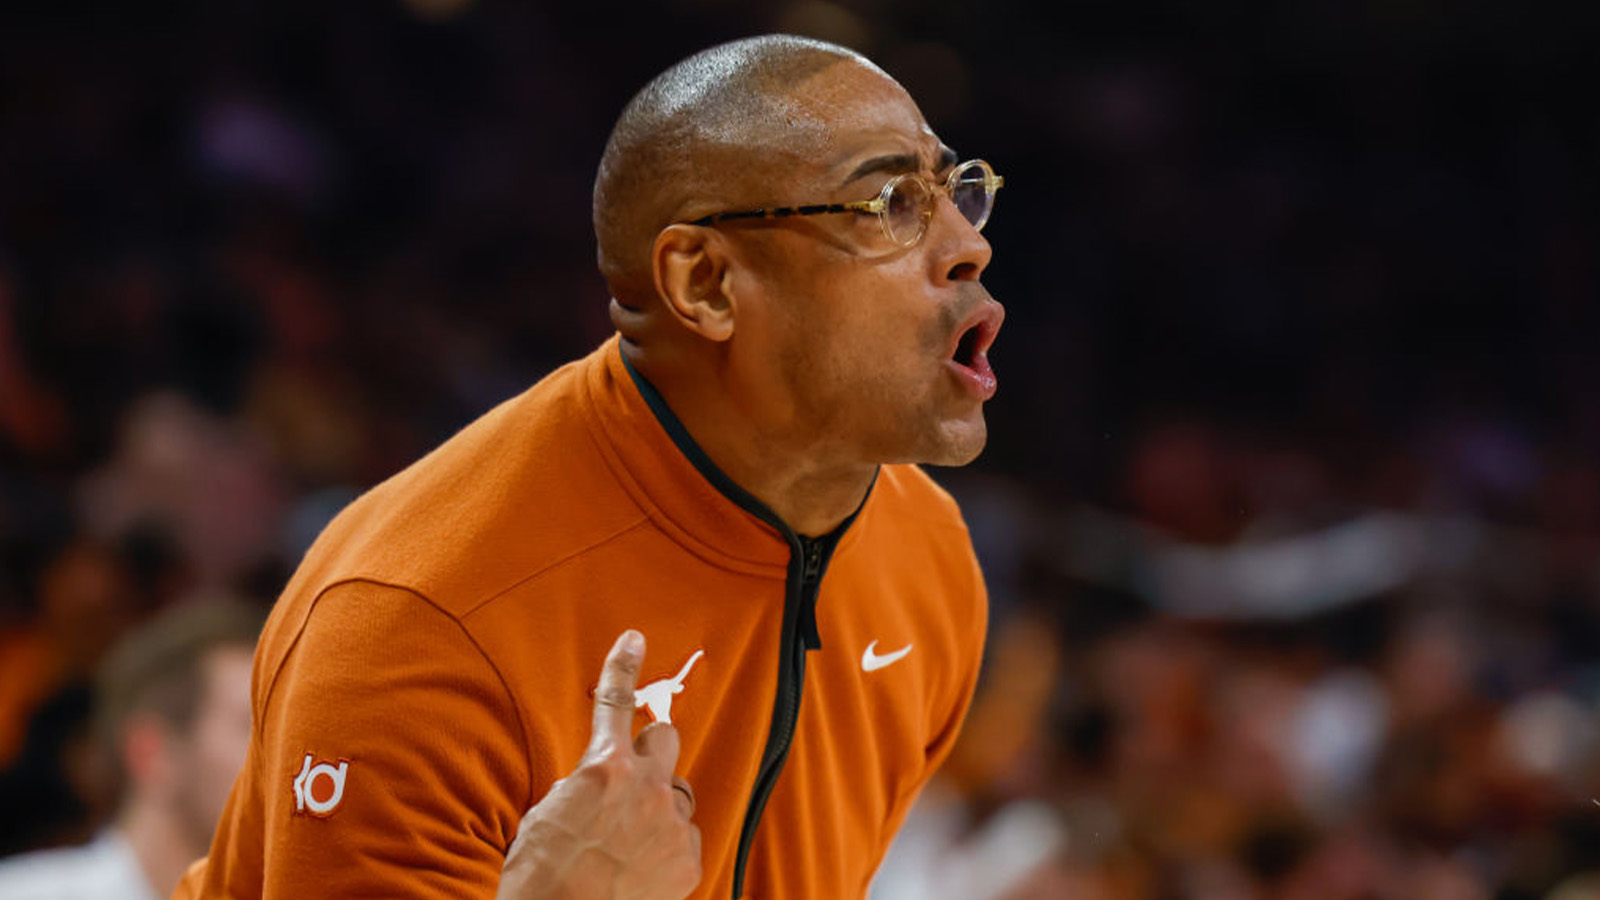 Texas Basketball Coach Issues Weak Apology For 'Horns Down' Anger